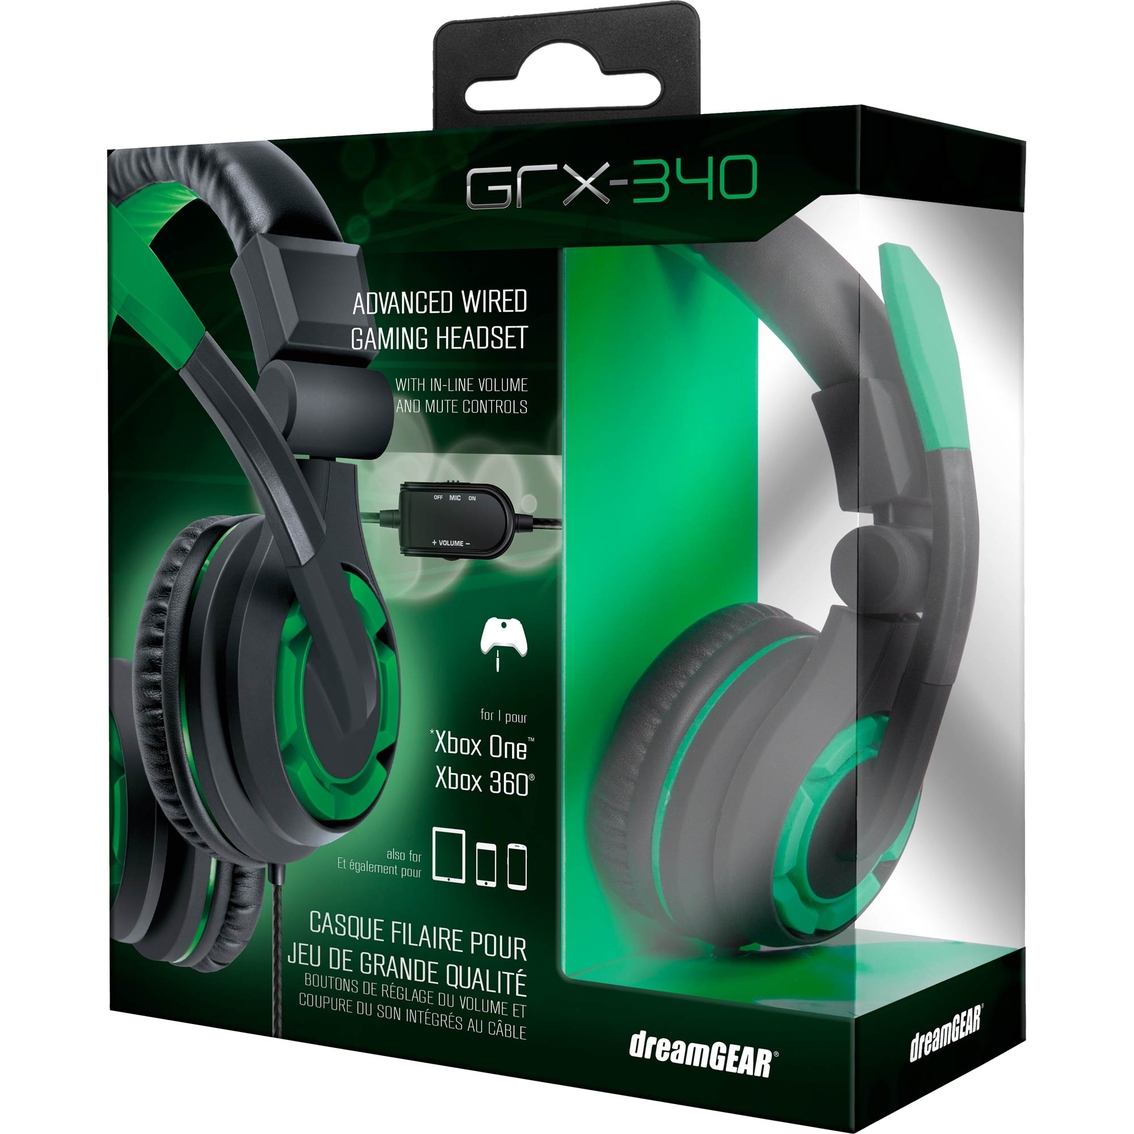 bionik GRX-340 Gaming Headset for Xbox One - Image 2 of 2